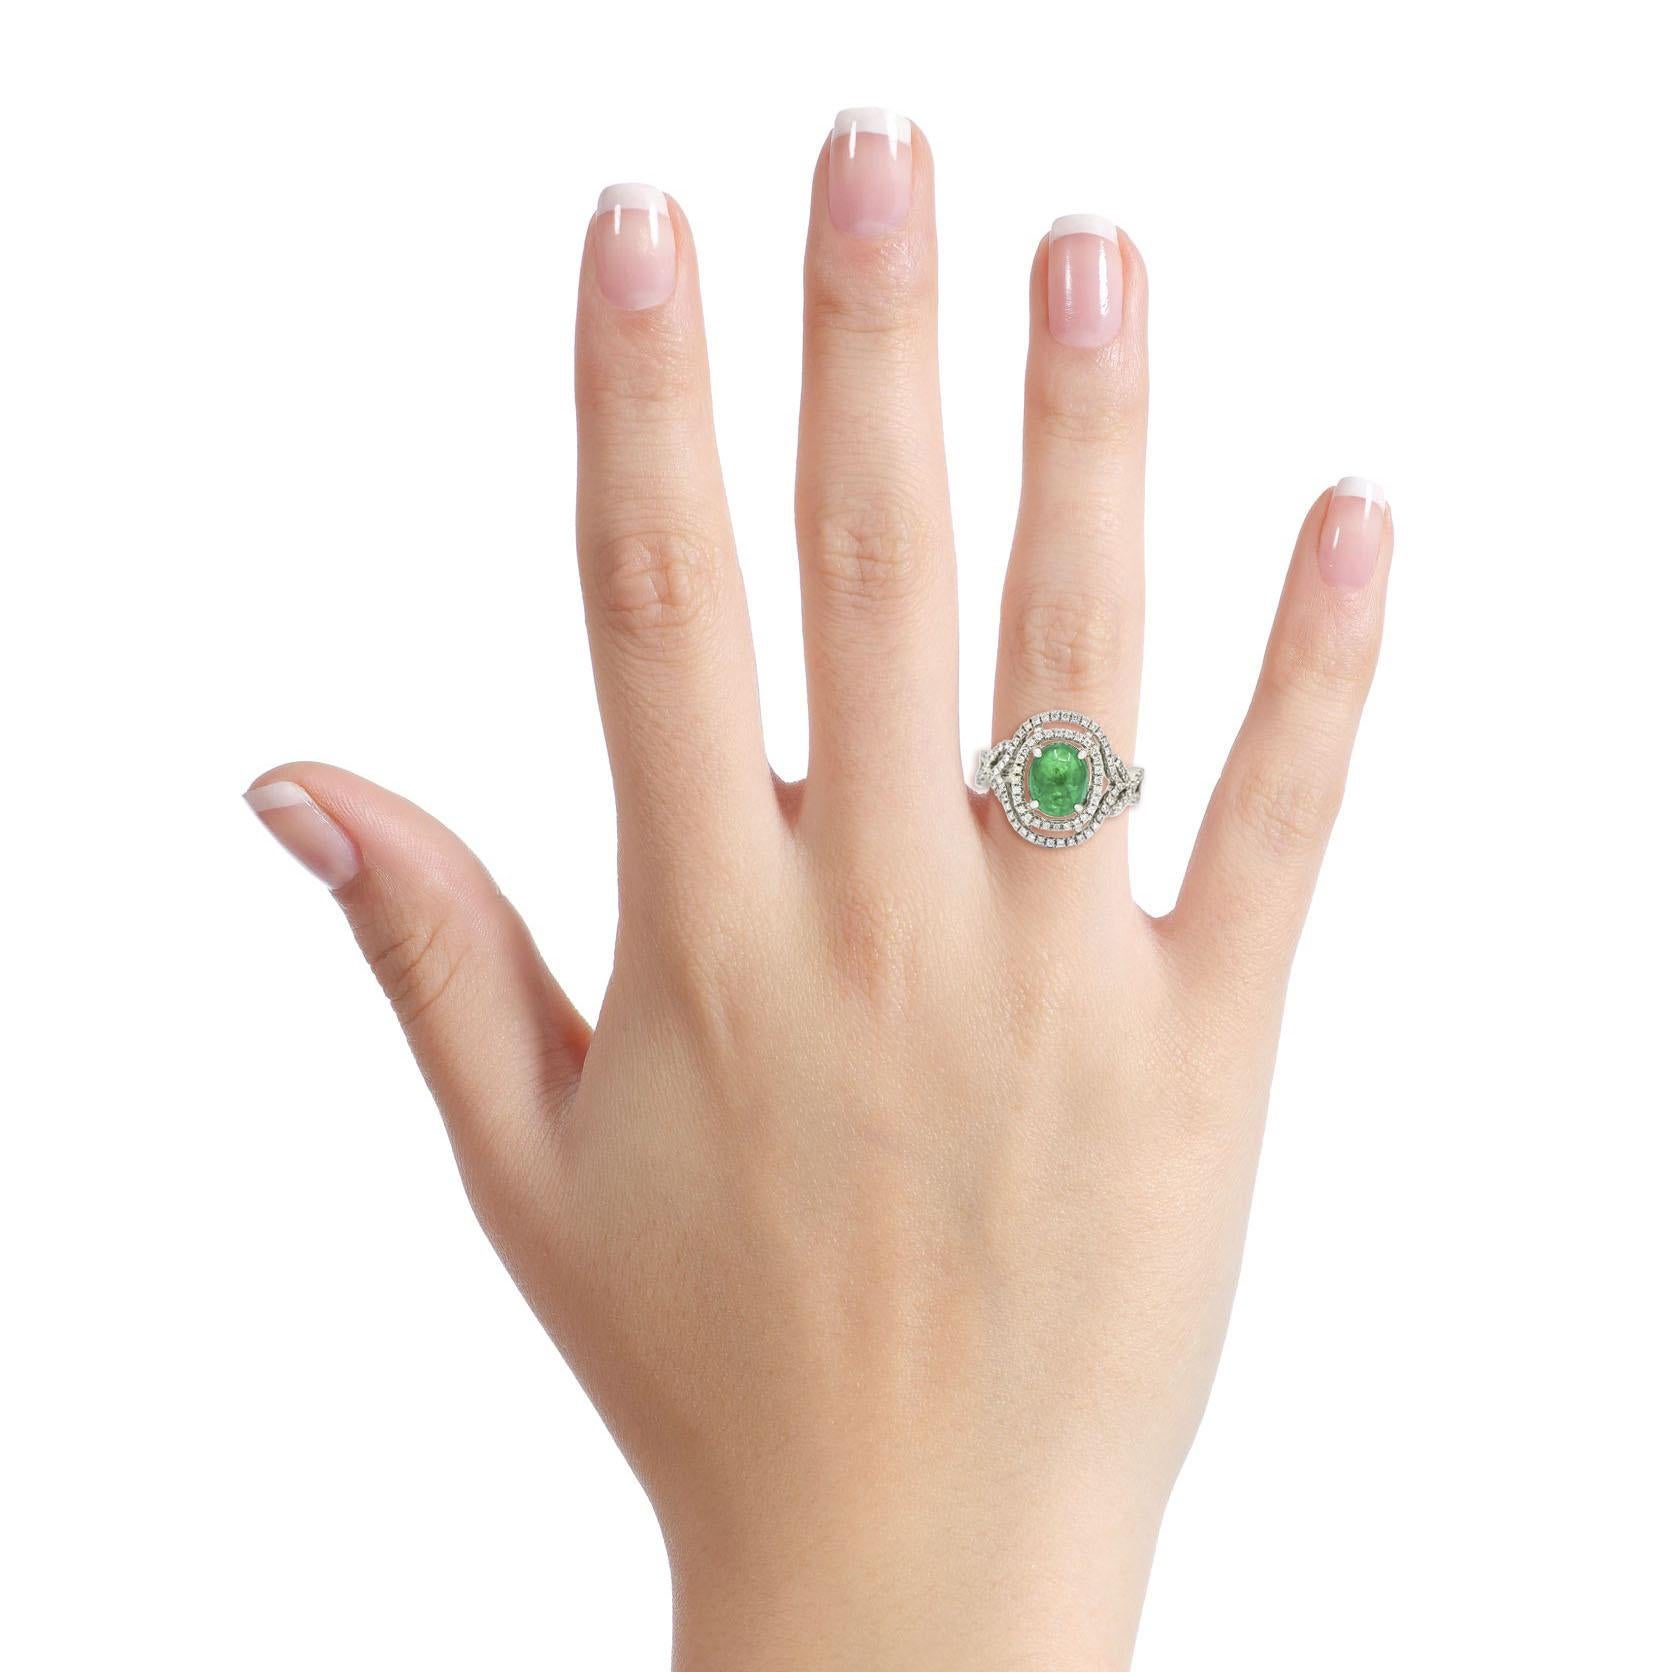 Emerald and diamond ring in 14-karat white gold. Polished white gold setting with 108 round cut natural diamonds, and a cabochon cut natural emerald in center. 

Size, 6.5
Height, 10mm
Width, 17mm - 3mm
Depth, 2mm
Weight, 6.5 grams
Emerald Total